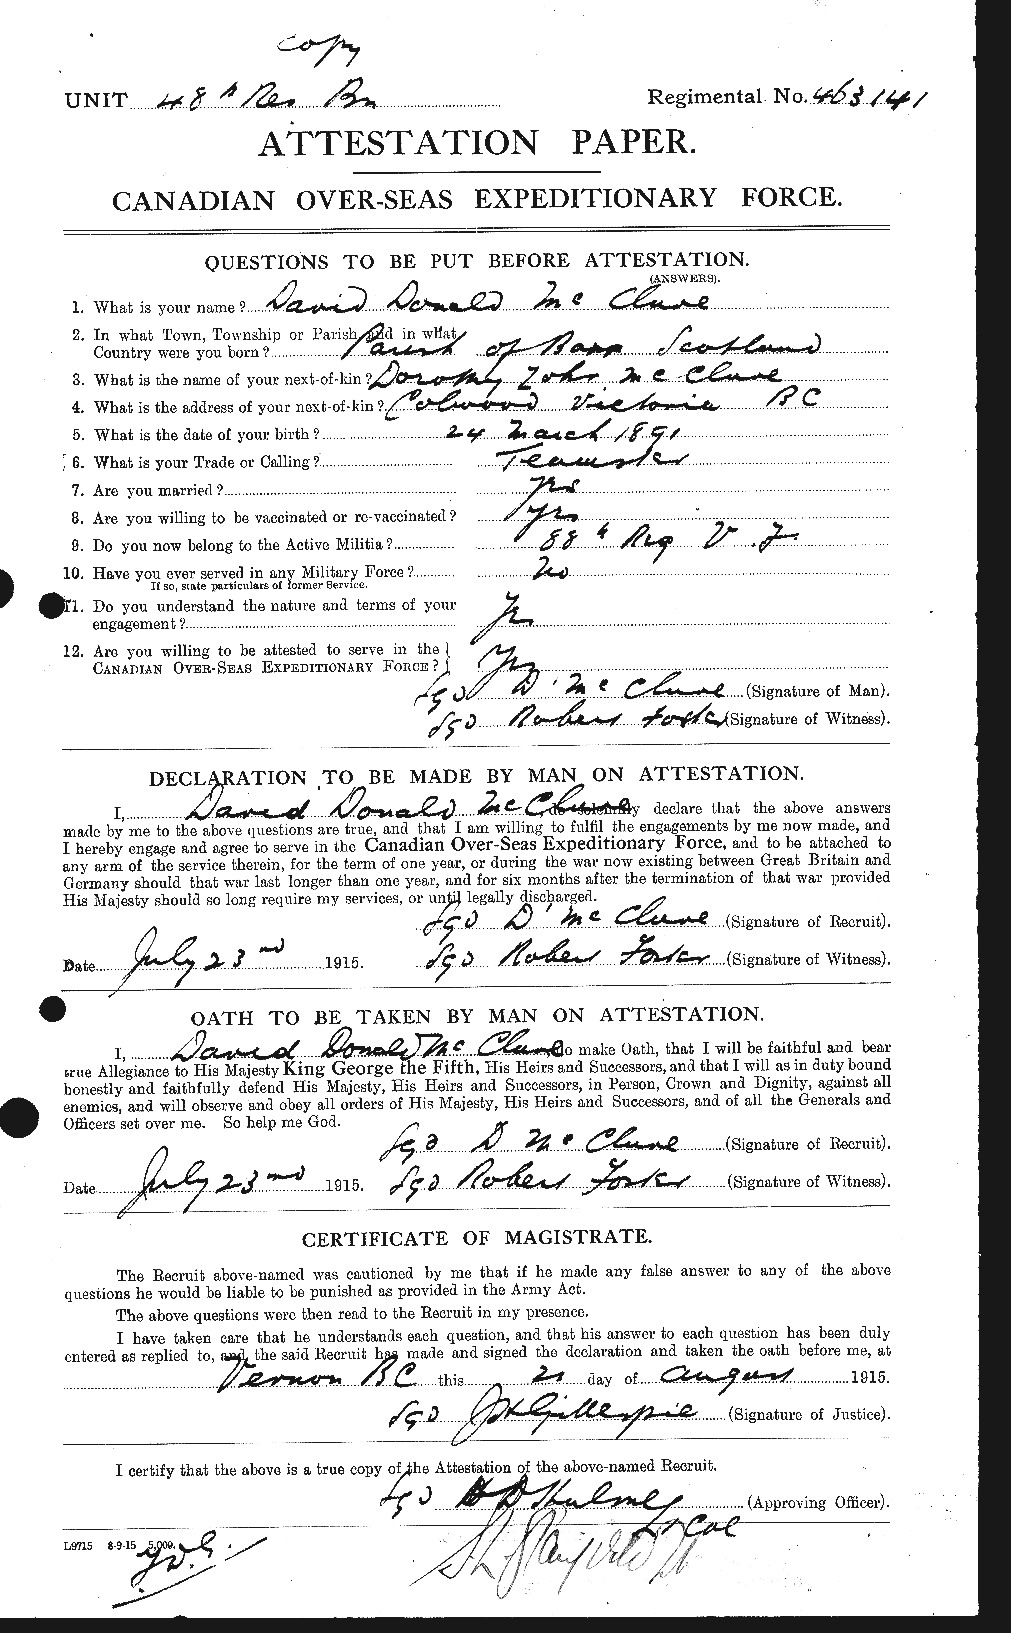 Personnel Records of the First World War - CEF 134281a